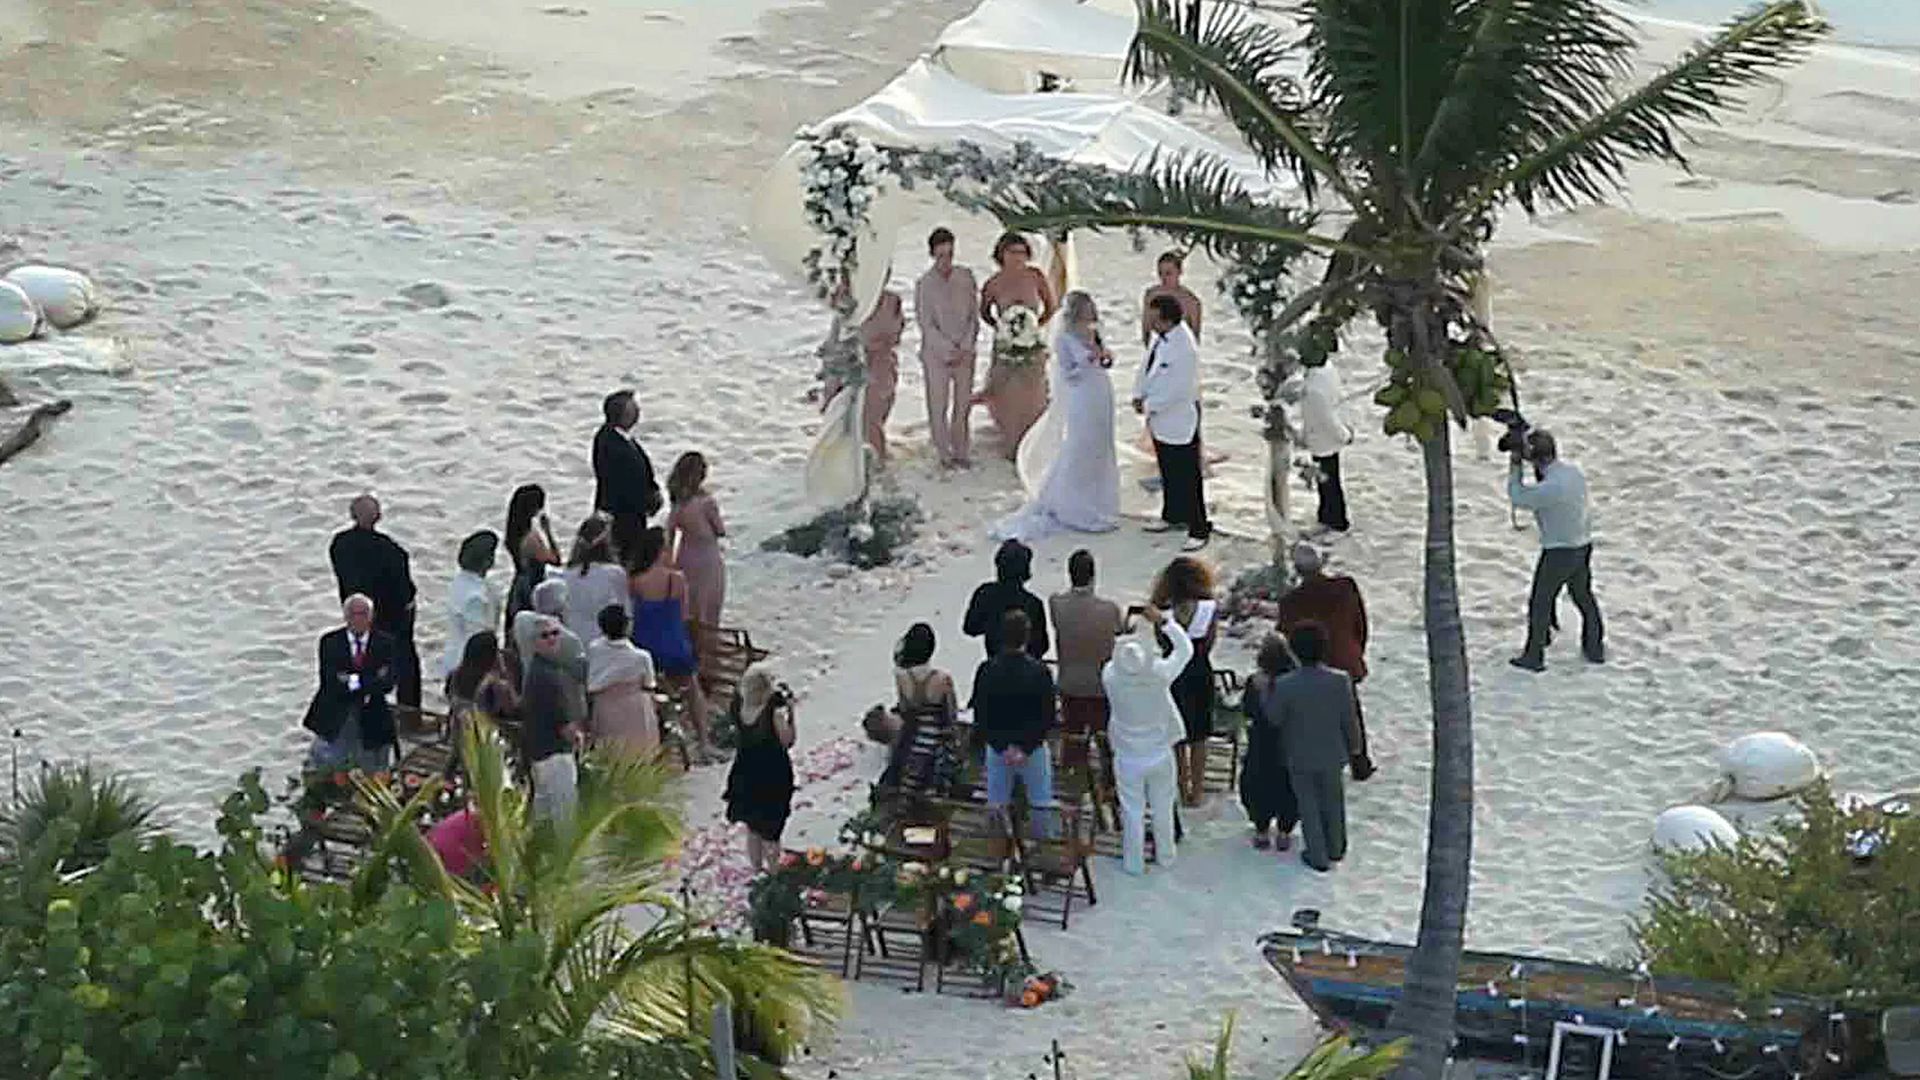 Photo from the wedding of Amber Heard and Johnny Depp